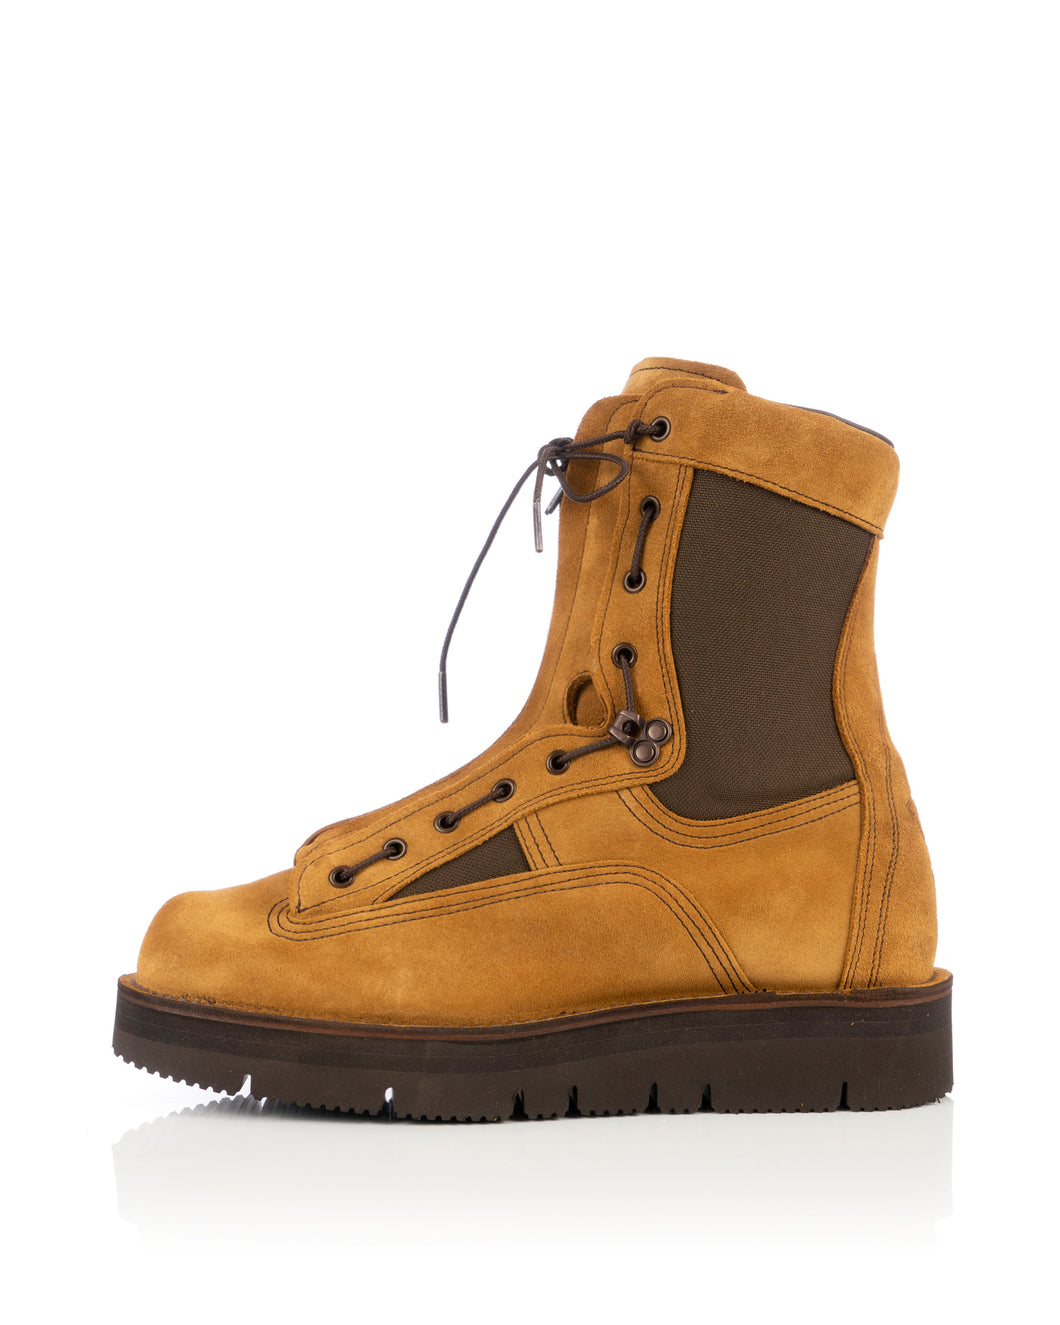 White Mountaineering | x DANNER BOOTS 'Combat' Brown | Concrete